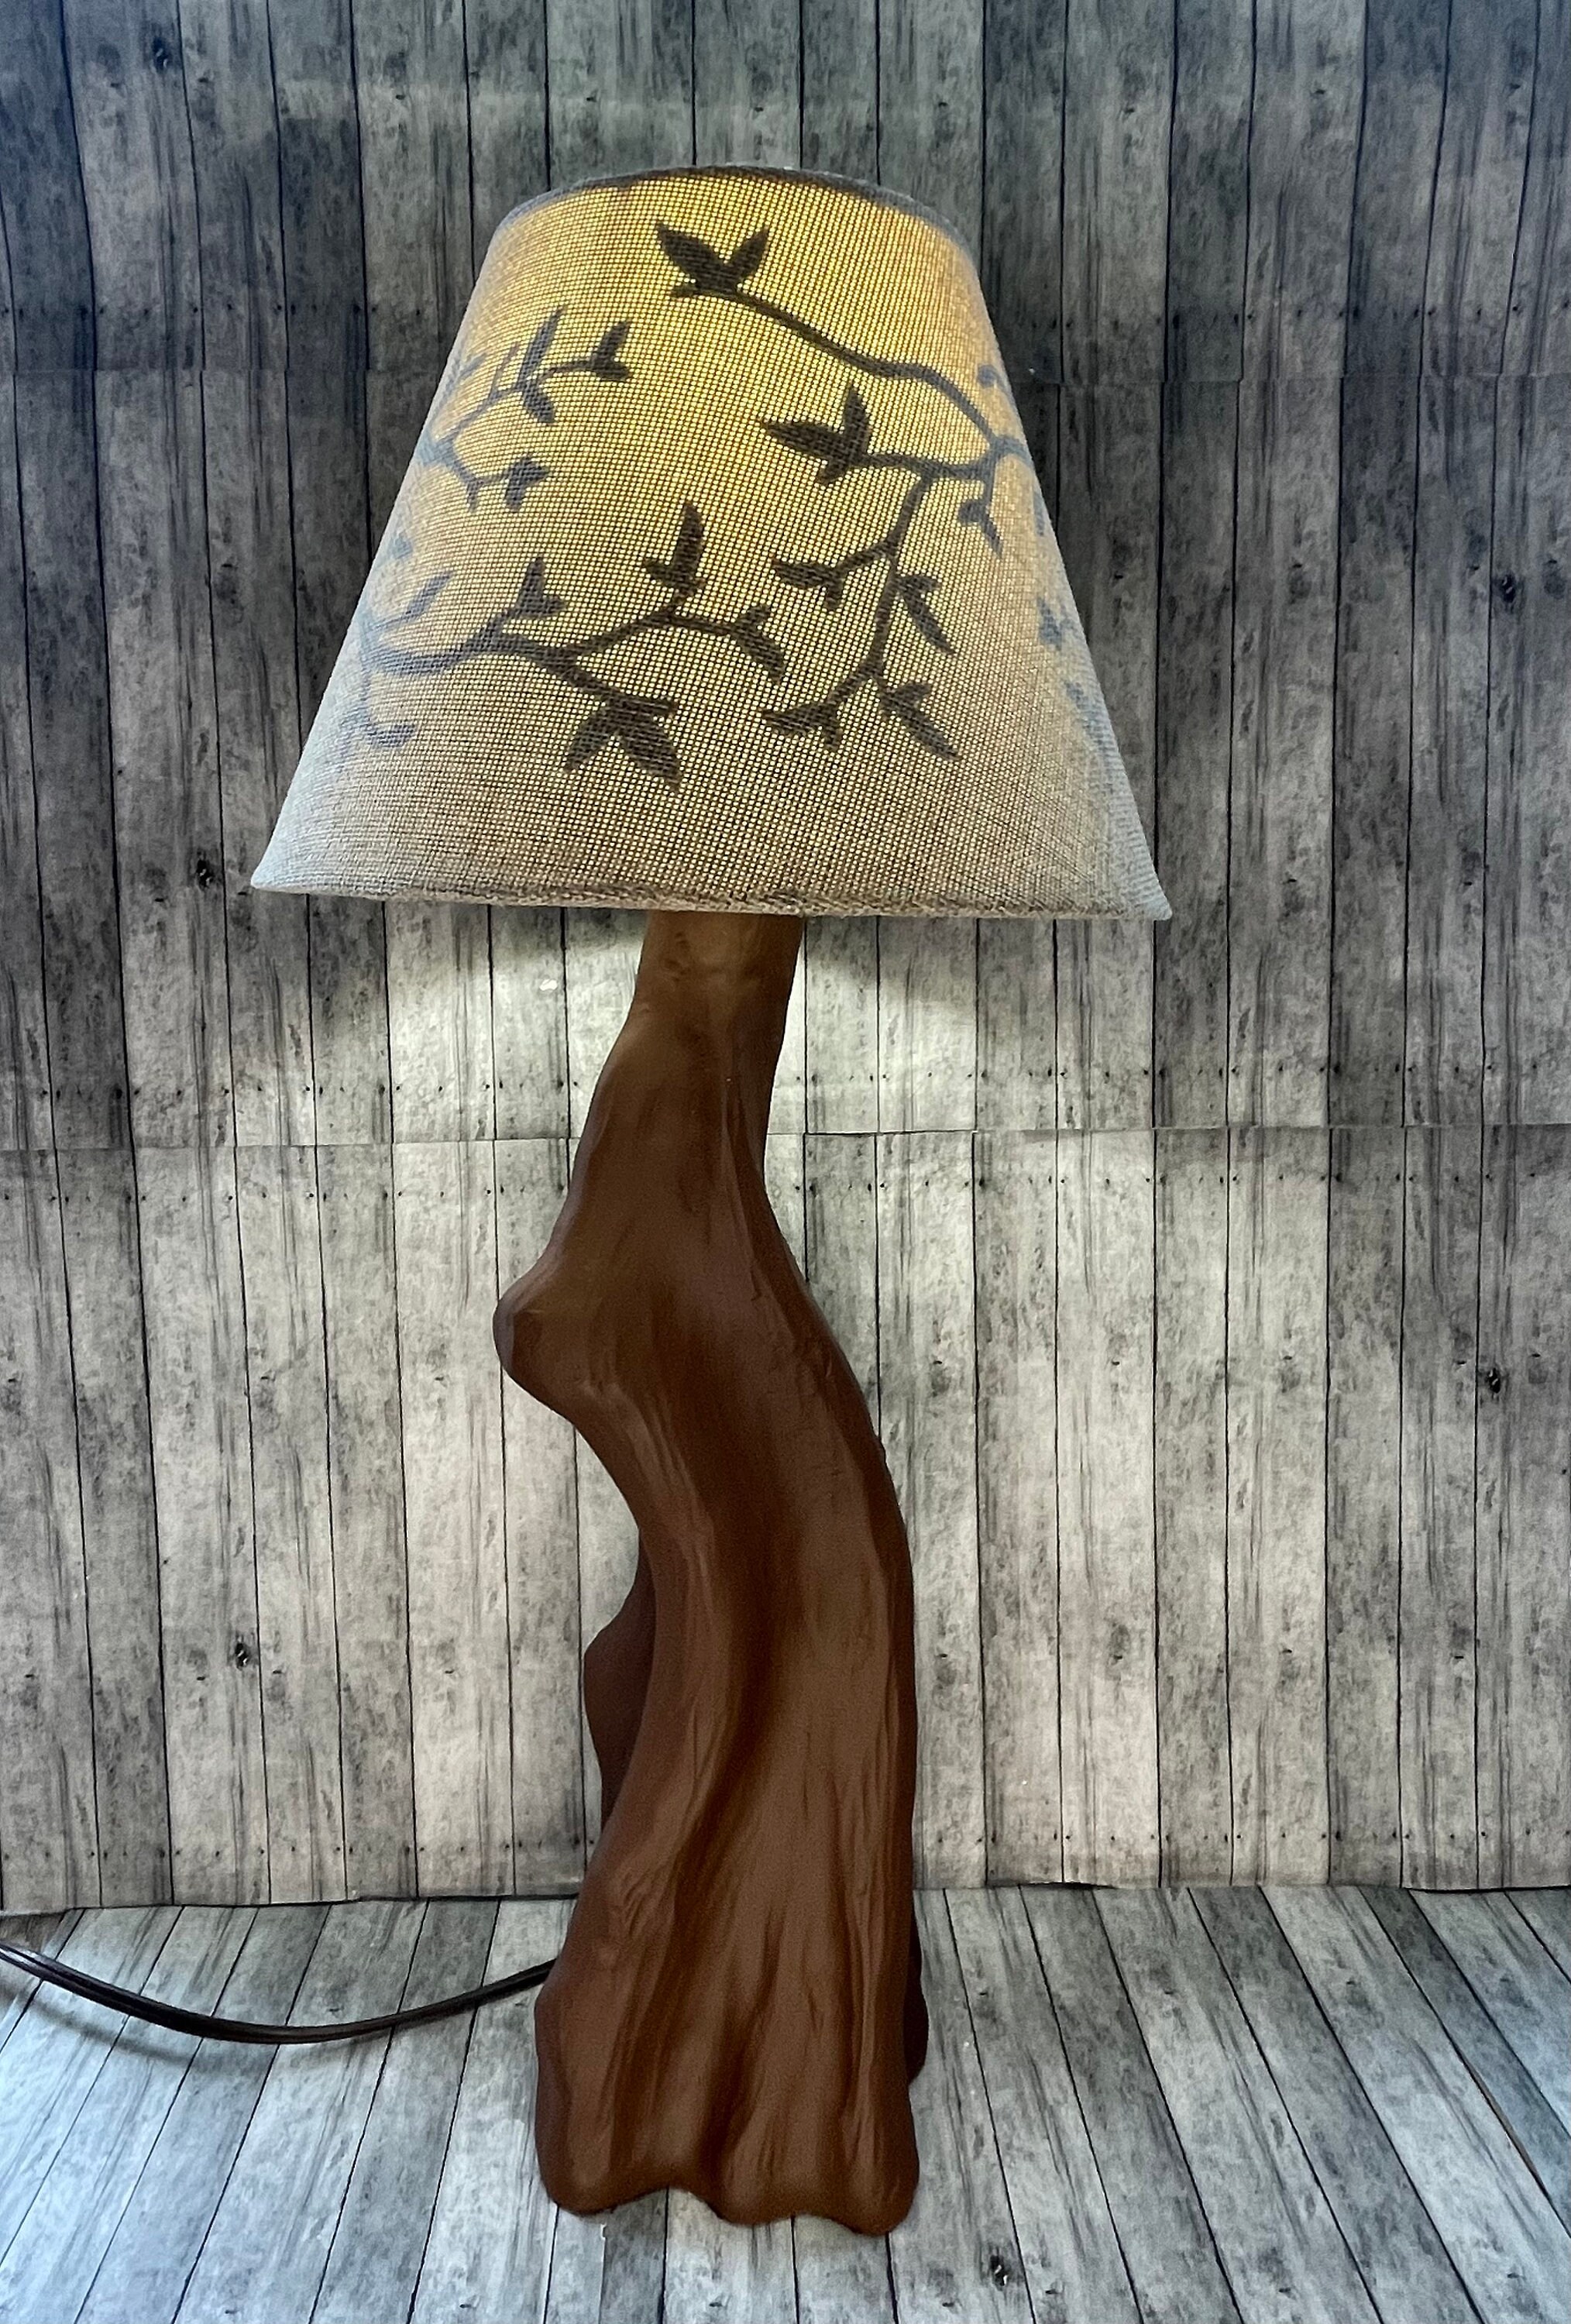 Afgrond Koningin Omleiding Tree Trunk Lamp With Branch and Leaves Lampshade - Etsy